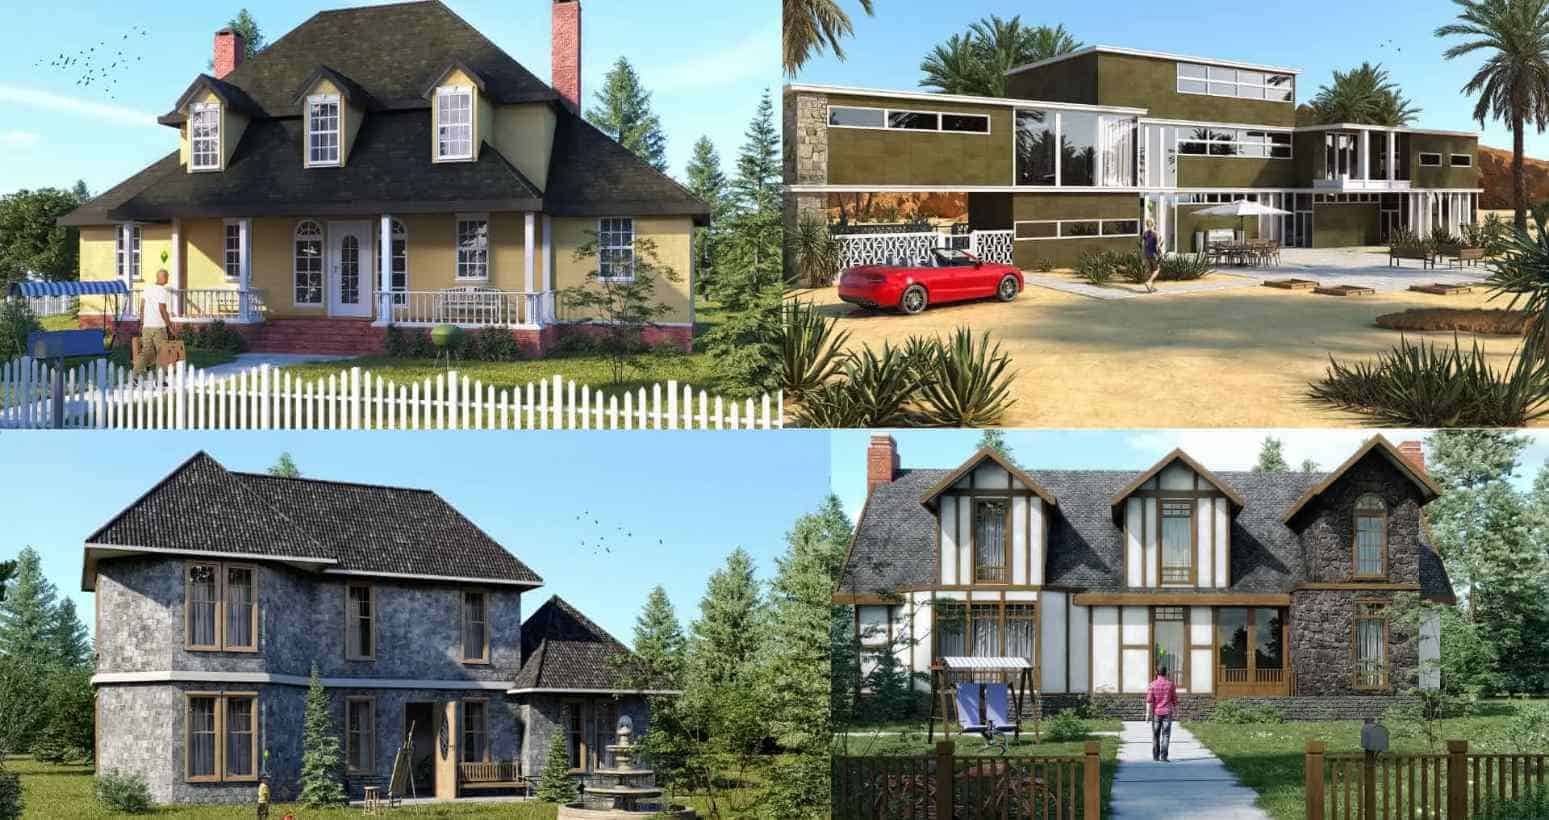 Sims 4 Houses Real Life Renders Pictures